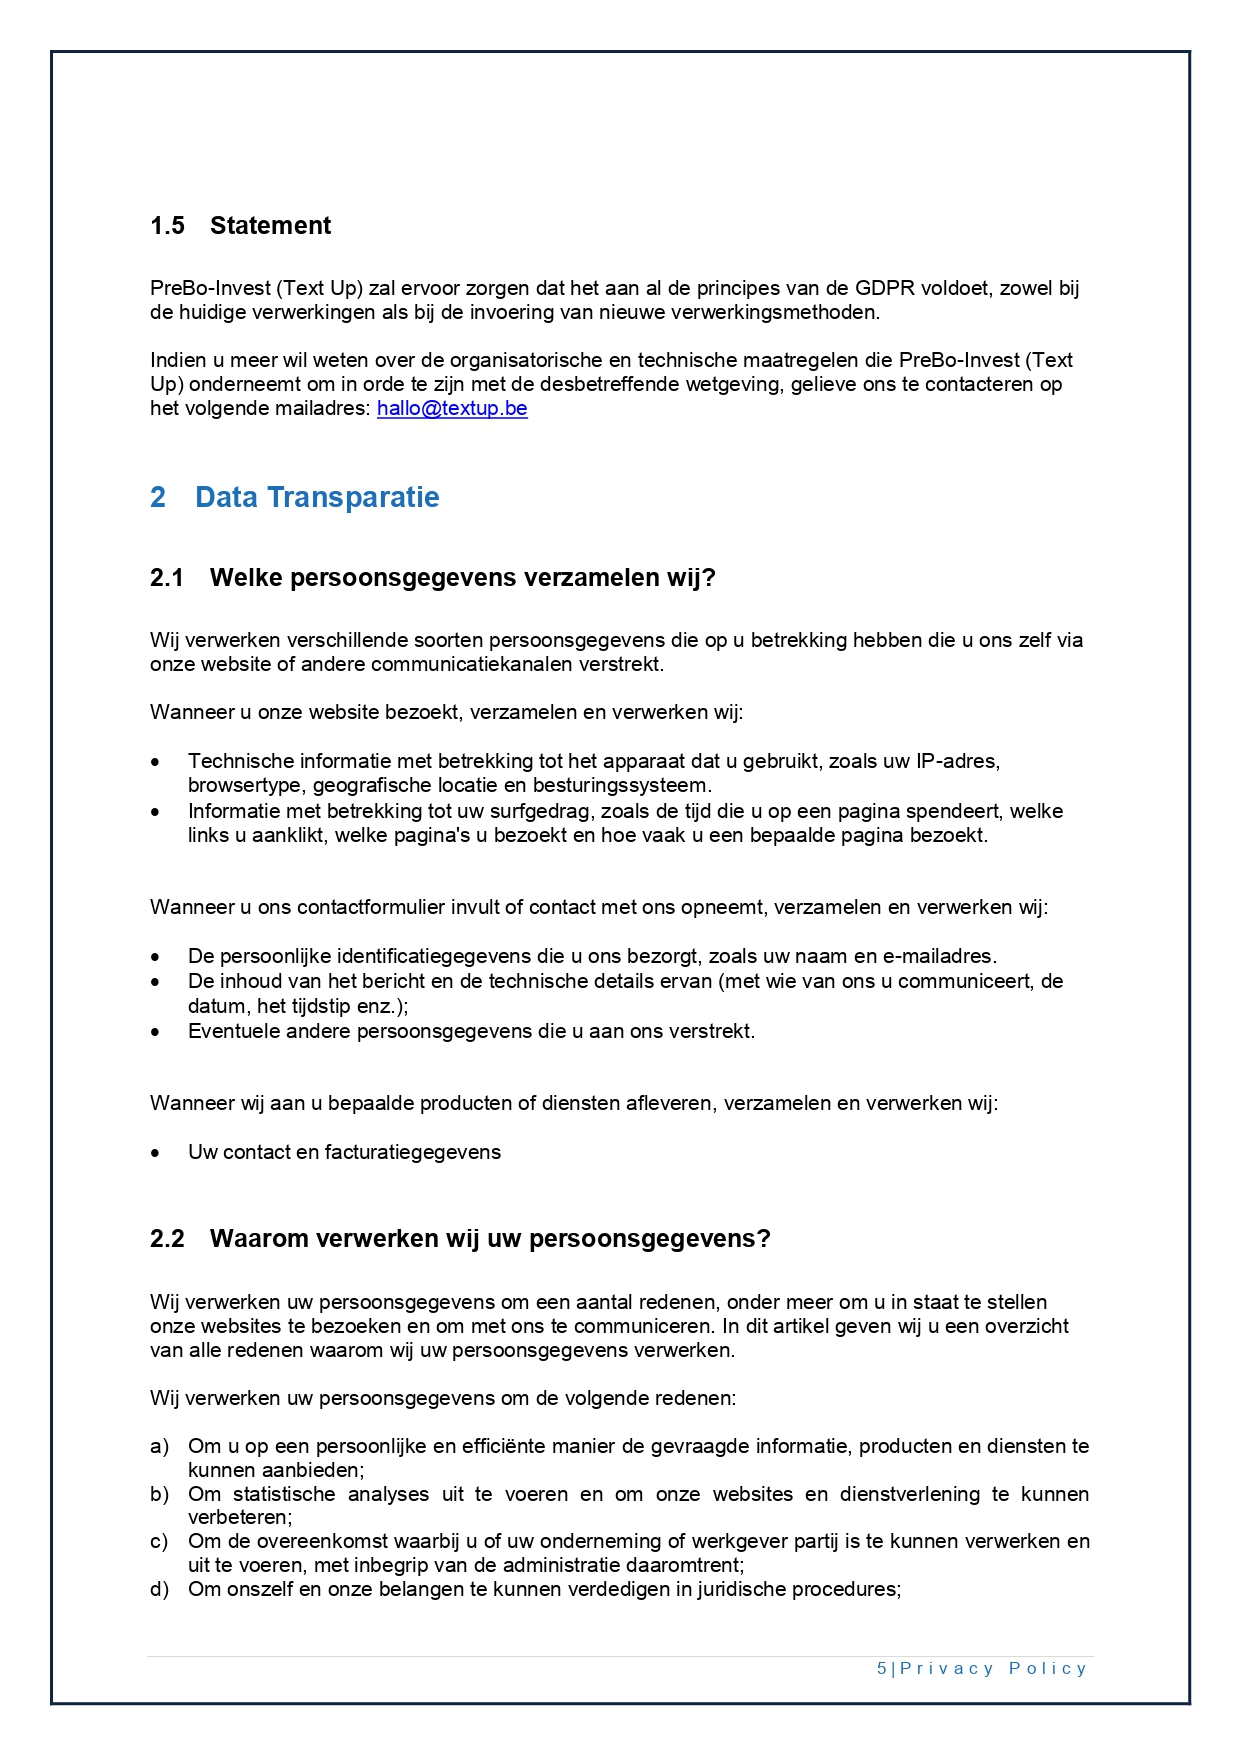 02 Privacy Policy textup.be NL V1.0 page 0005